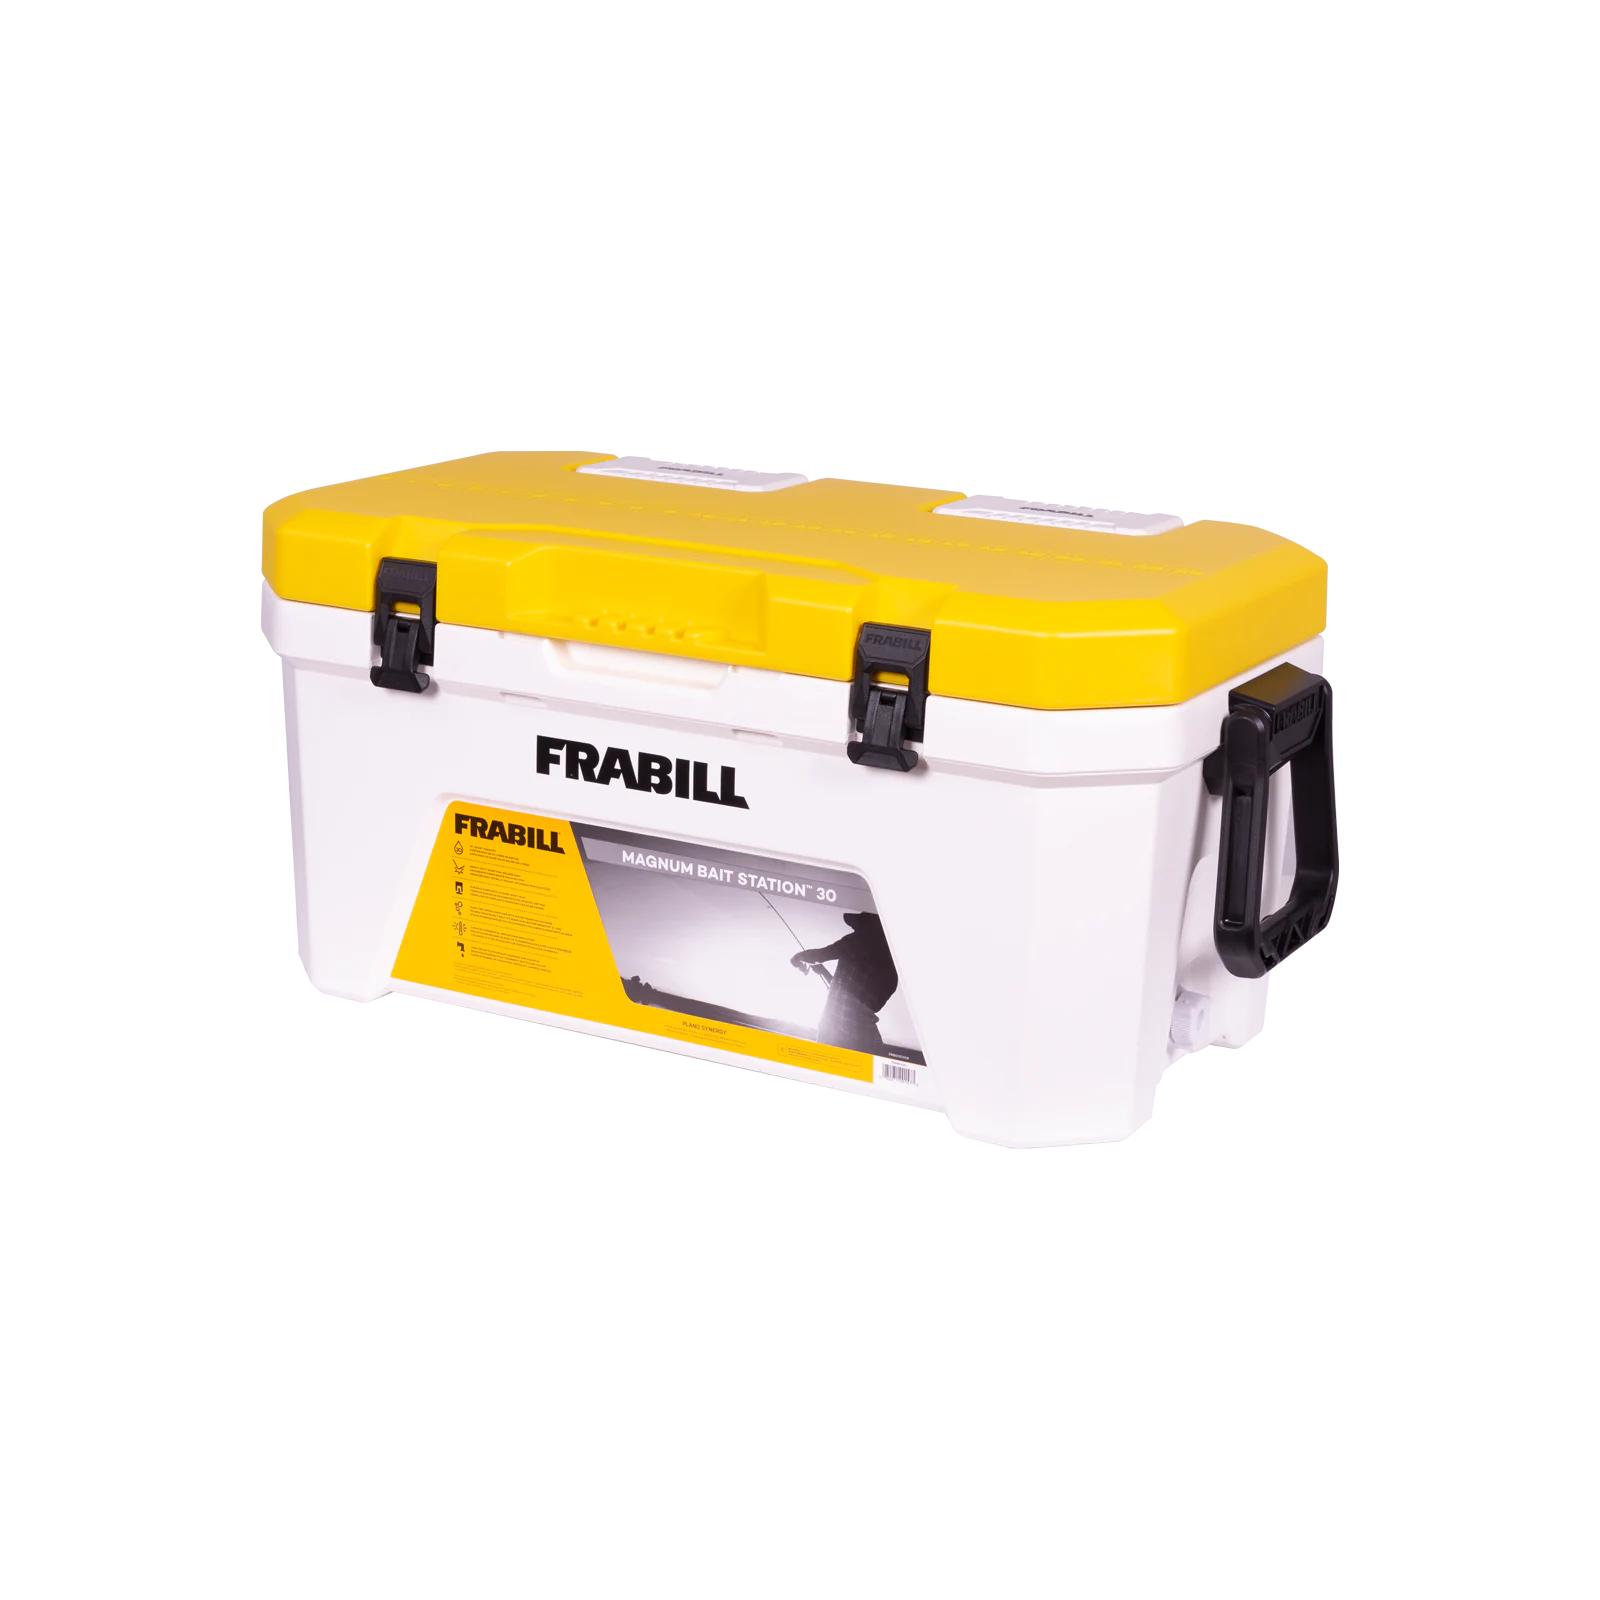 Frabill Magnum Bait Station 30 – Jack Traps Ice Fishing Traps and